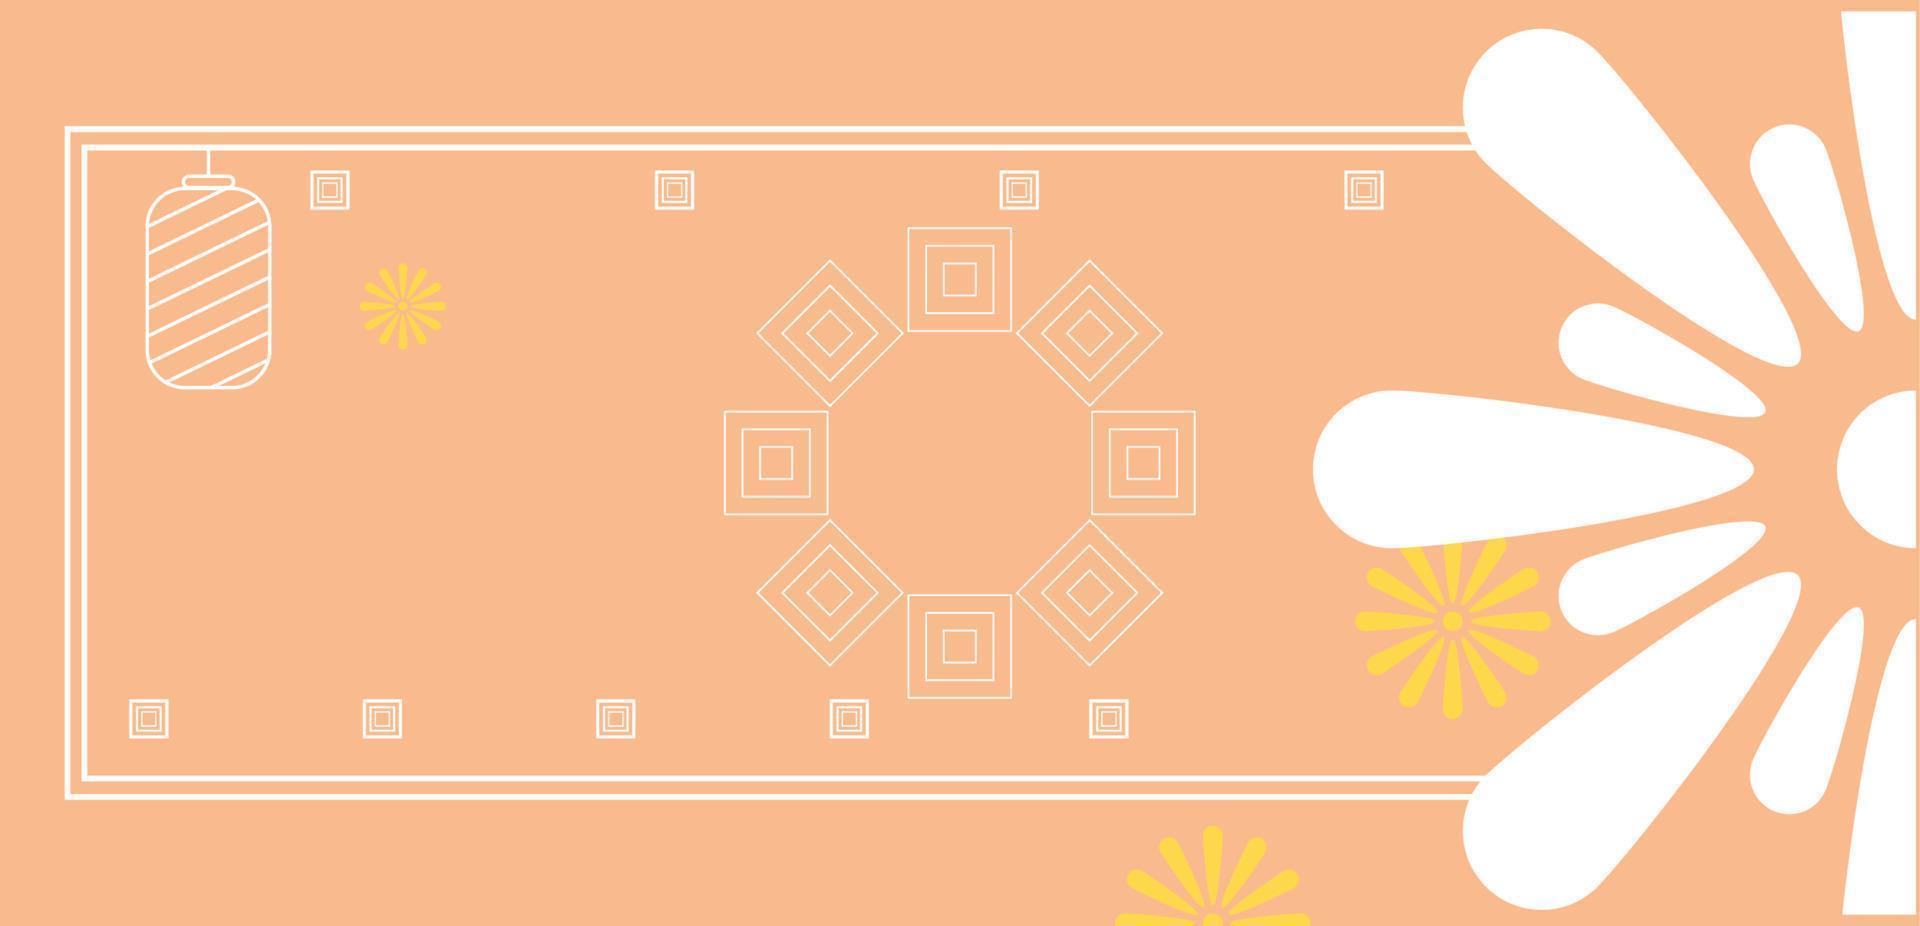 Chinese japanese background frame template vector